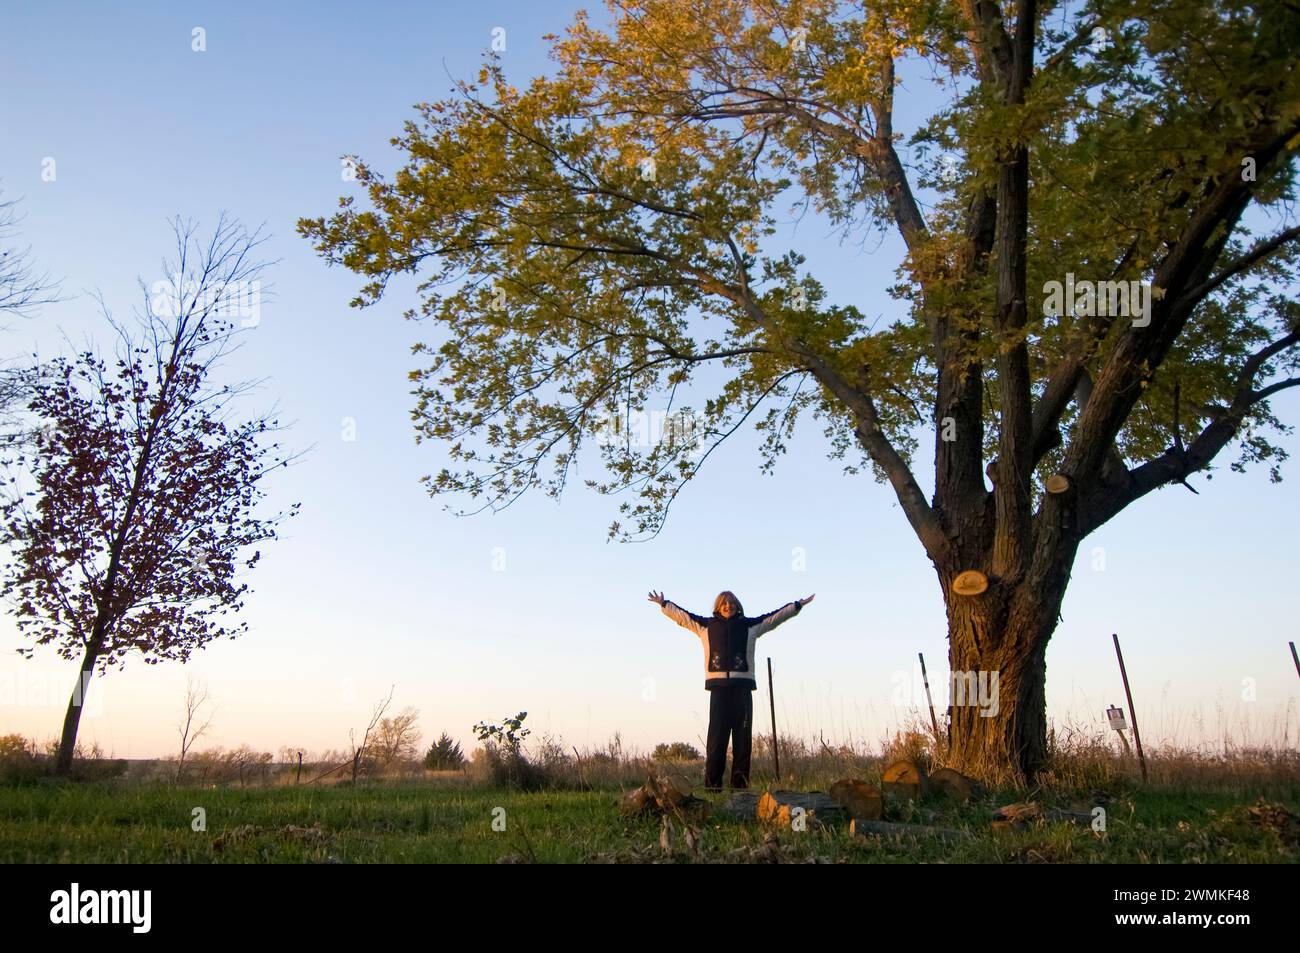 Girl stands with arms outstretched in the outdoors, a nature-lover; Princeton, Nebraska, United States of America Stock Photo